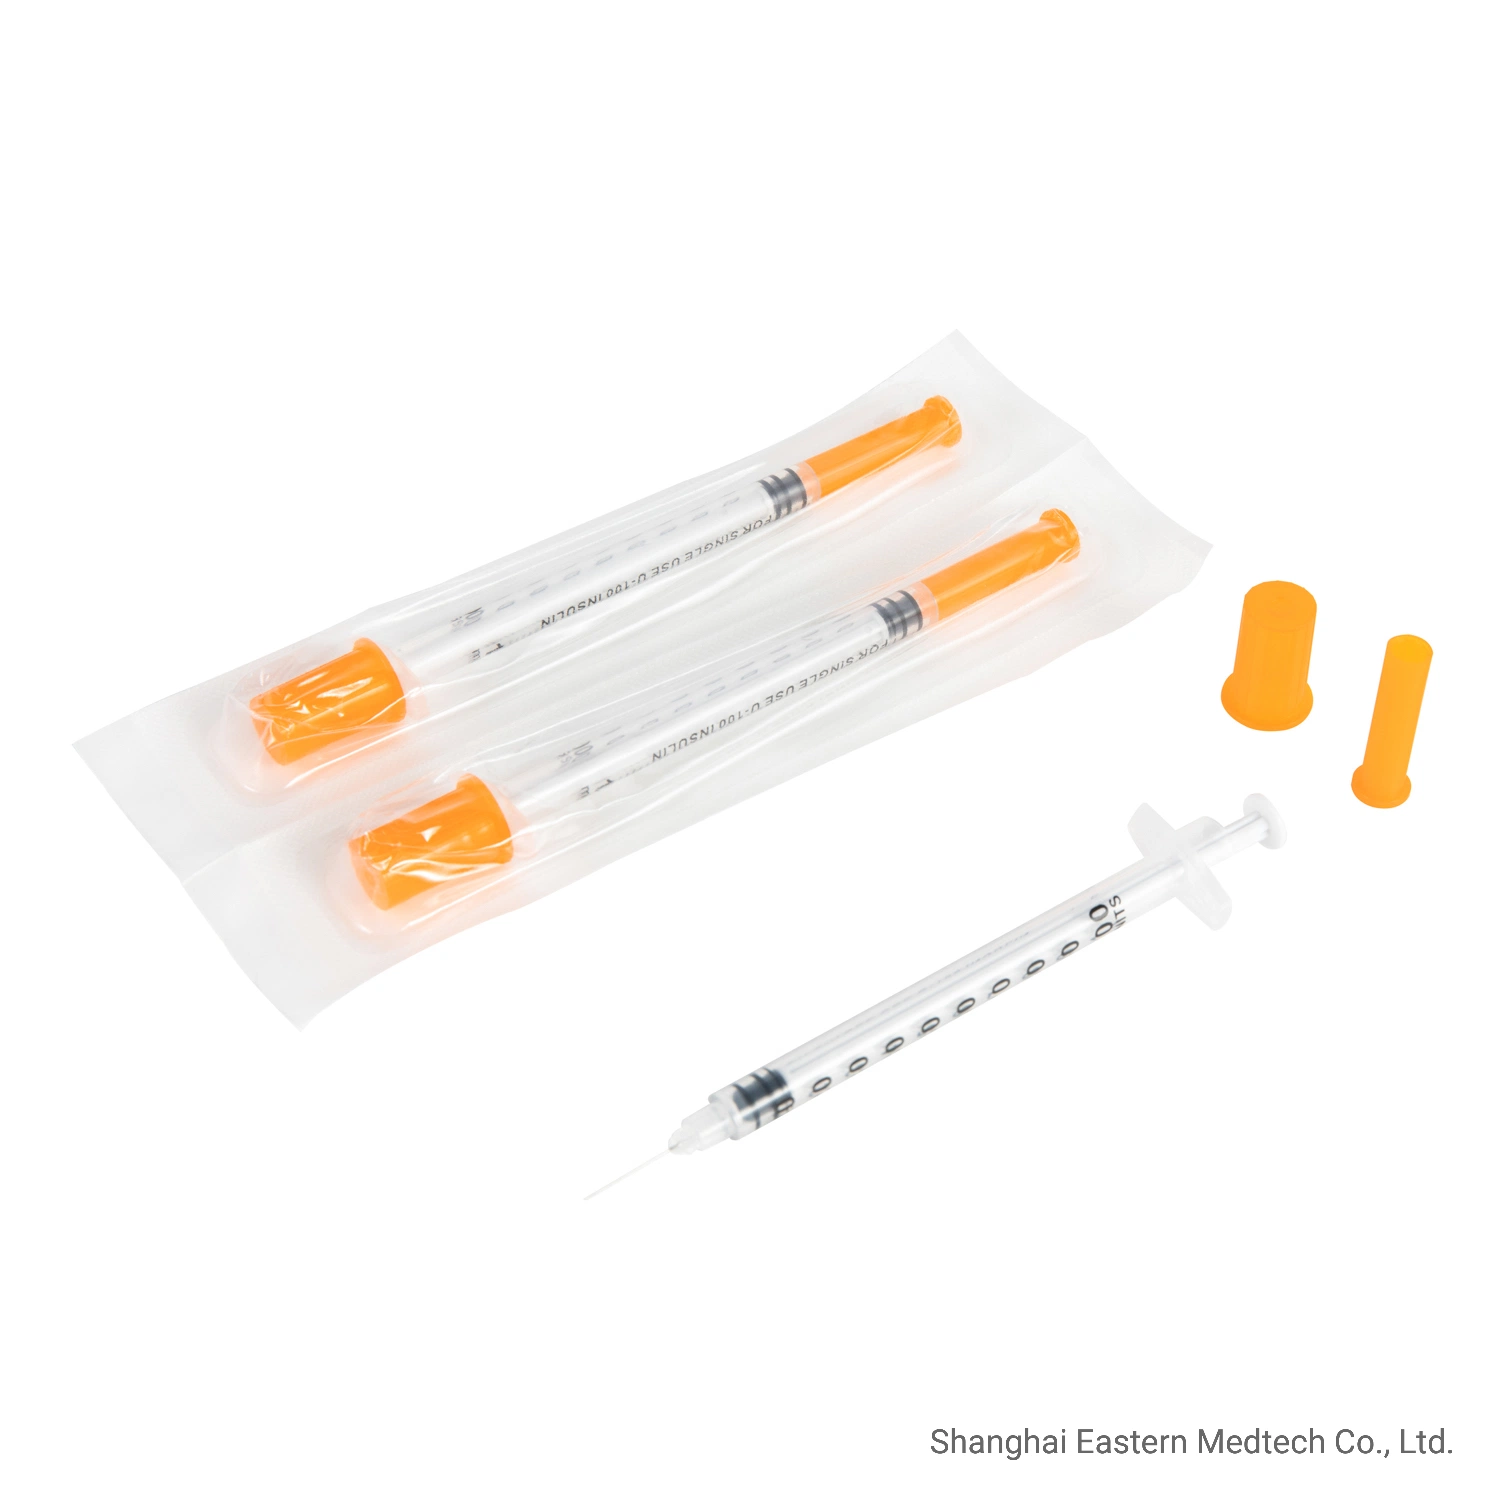 10PCS Per Bag Insulin Injection Disposable Medical Sterile Colored Insulin Syringe with Orange Cap and Needle